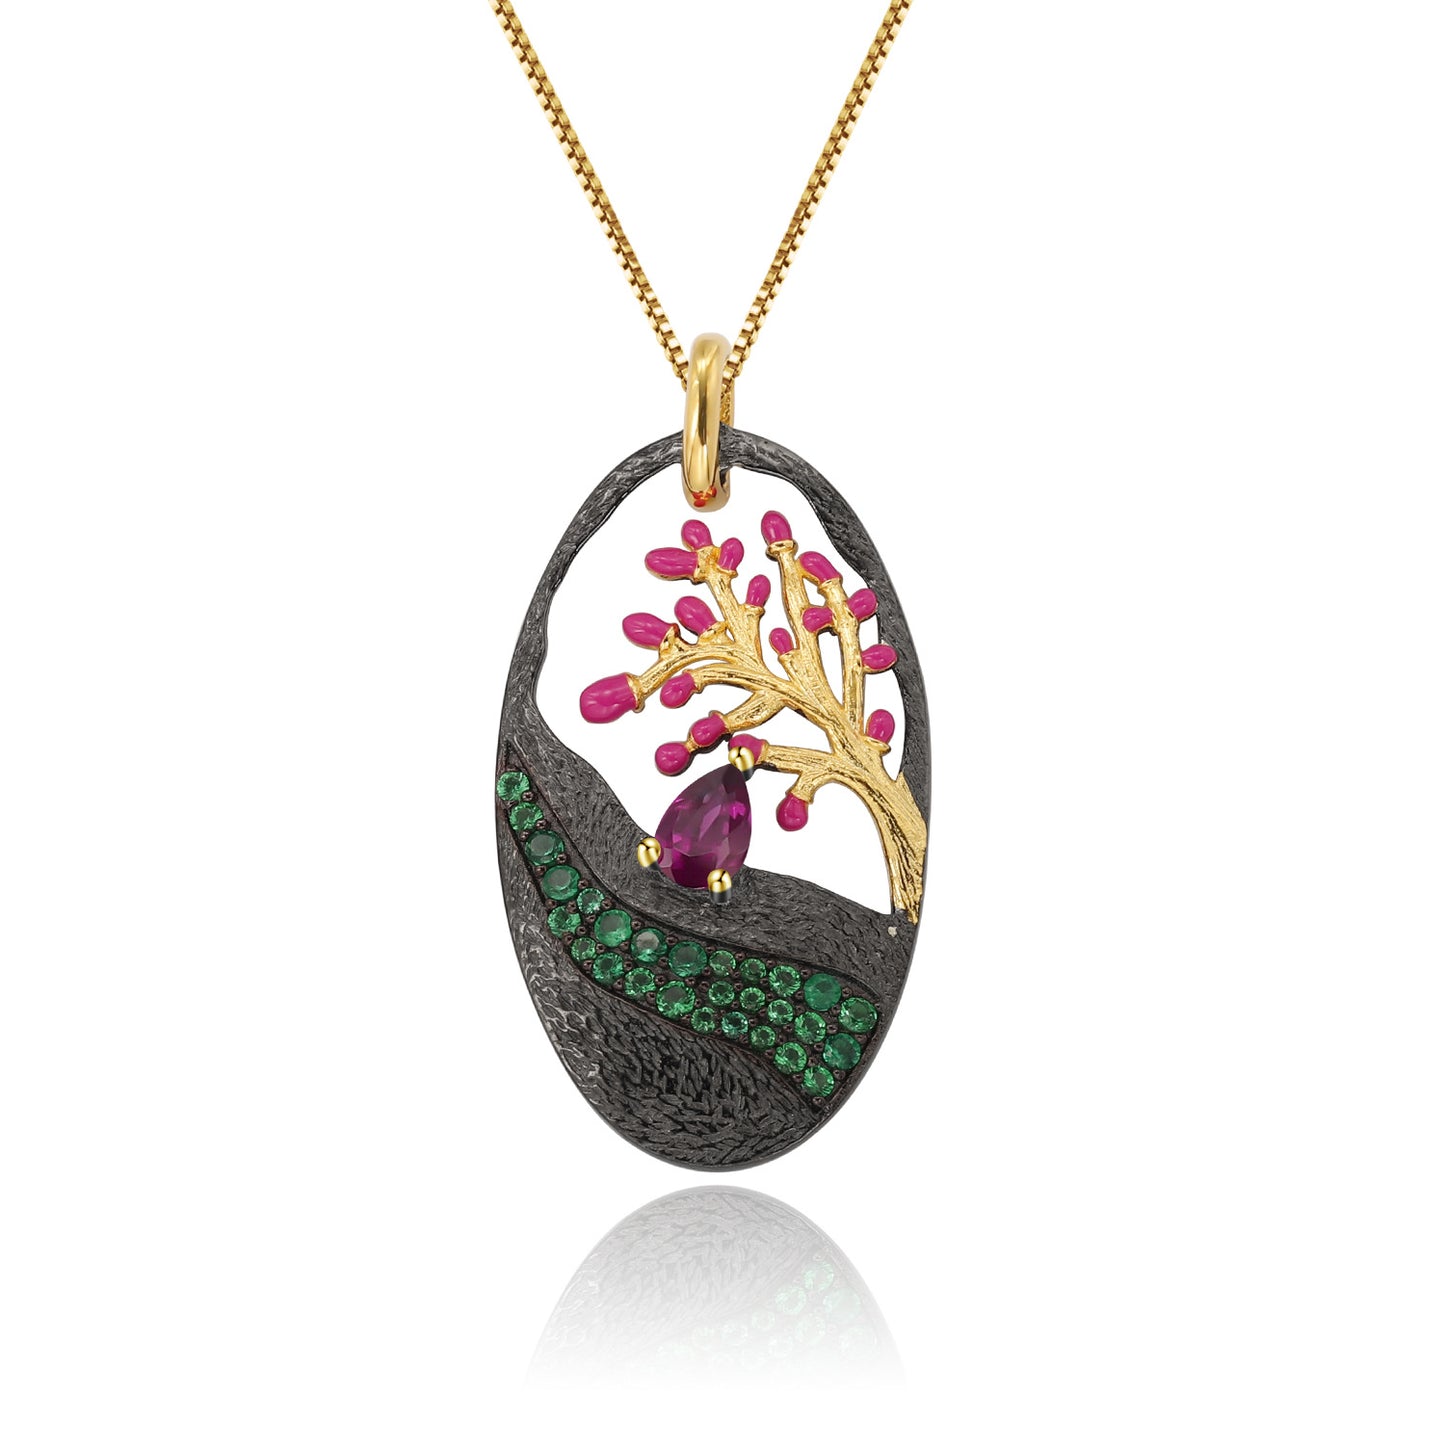 Italian Crafts Design Inlaid Natural Colourful Gemstone Enamel Tree of Life Pendant Sterling Silver Necklace for Women